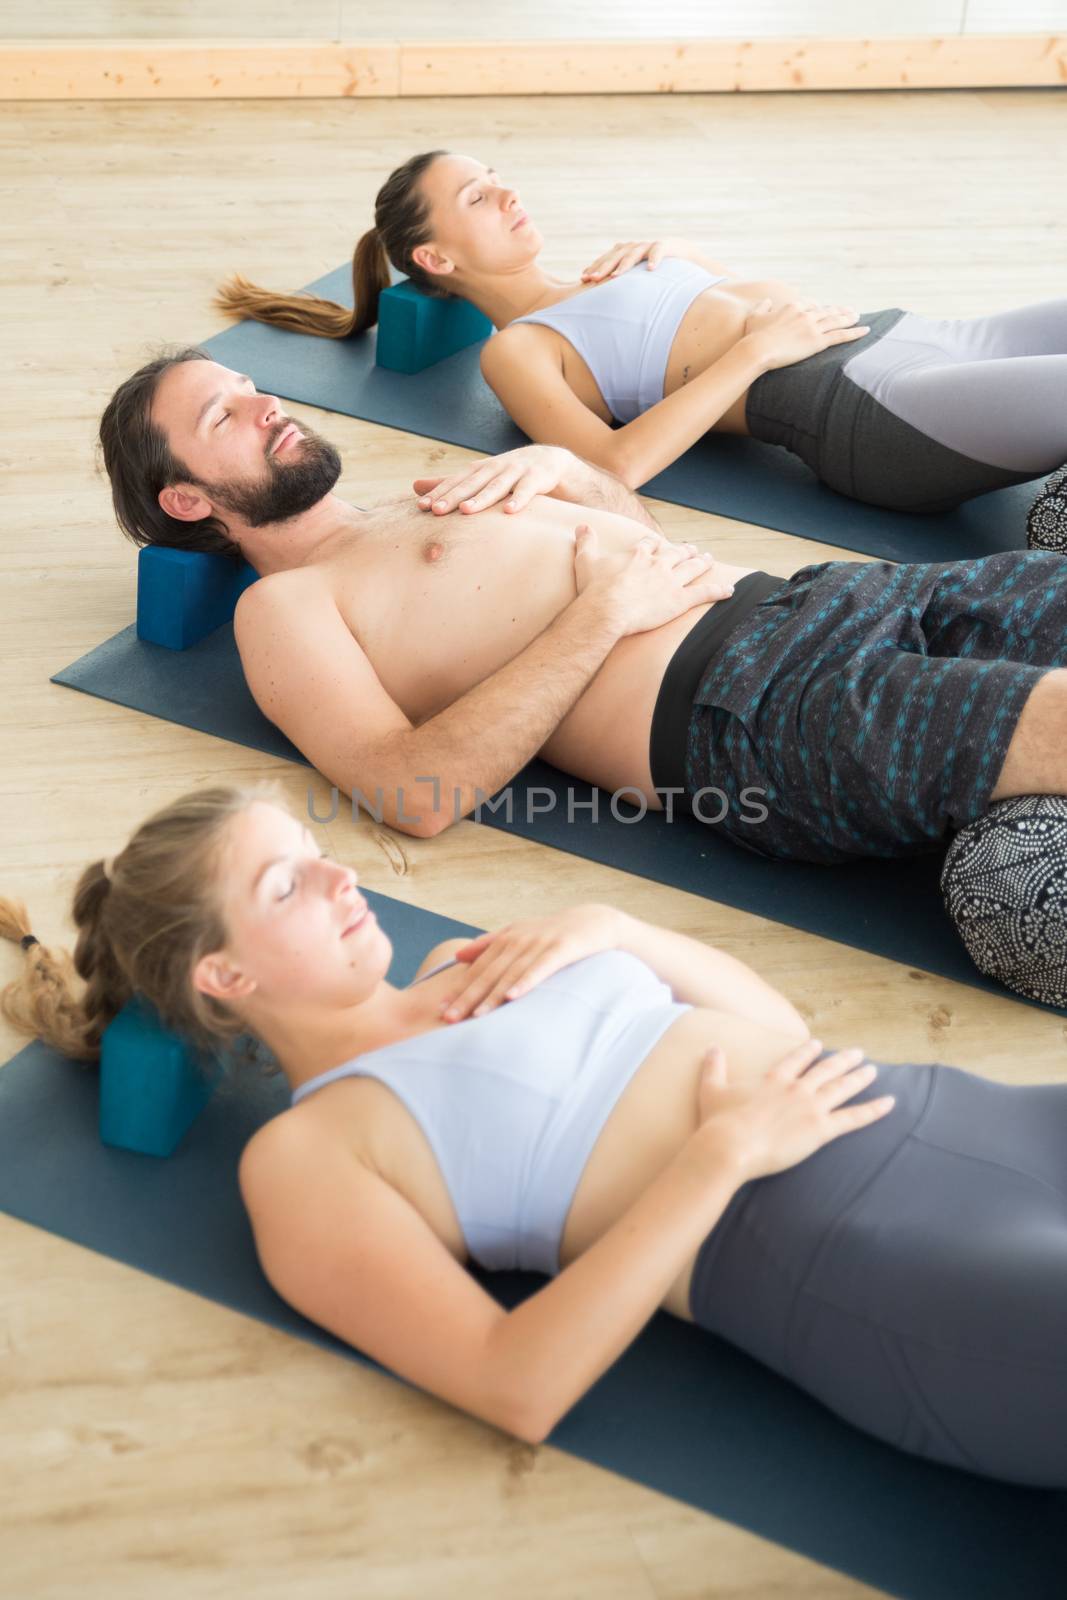 Restorative yoga with a bolster. Group of young sporty attractive people in yoga studio, lying on bolster cushion, stretching and relaxing during restorative yoga. Healthy active lifestyle.